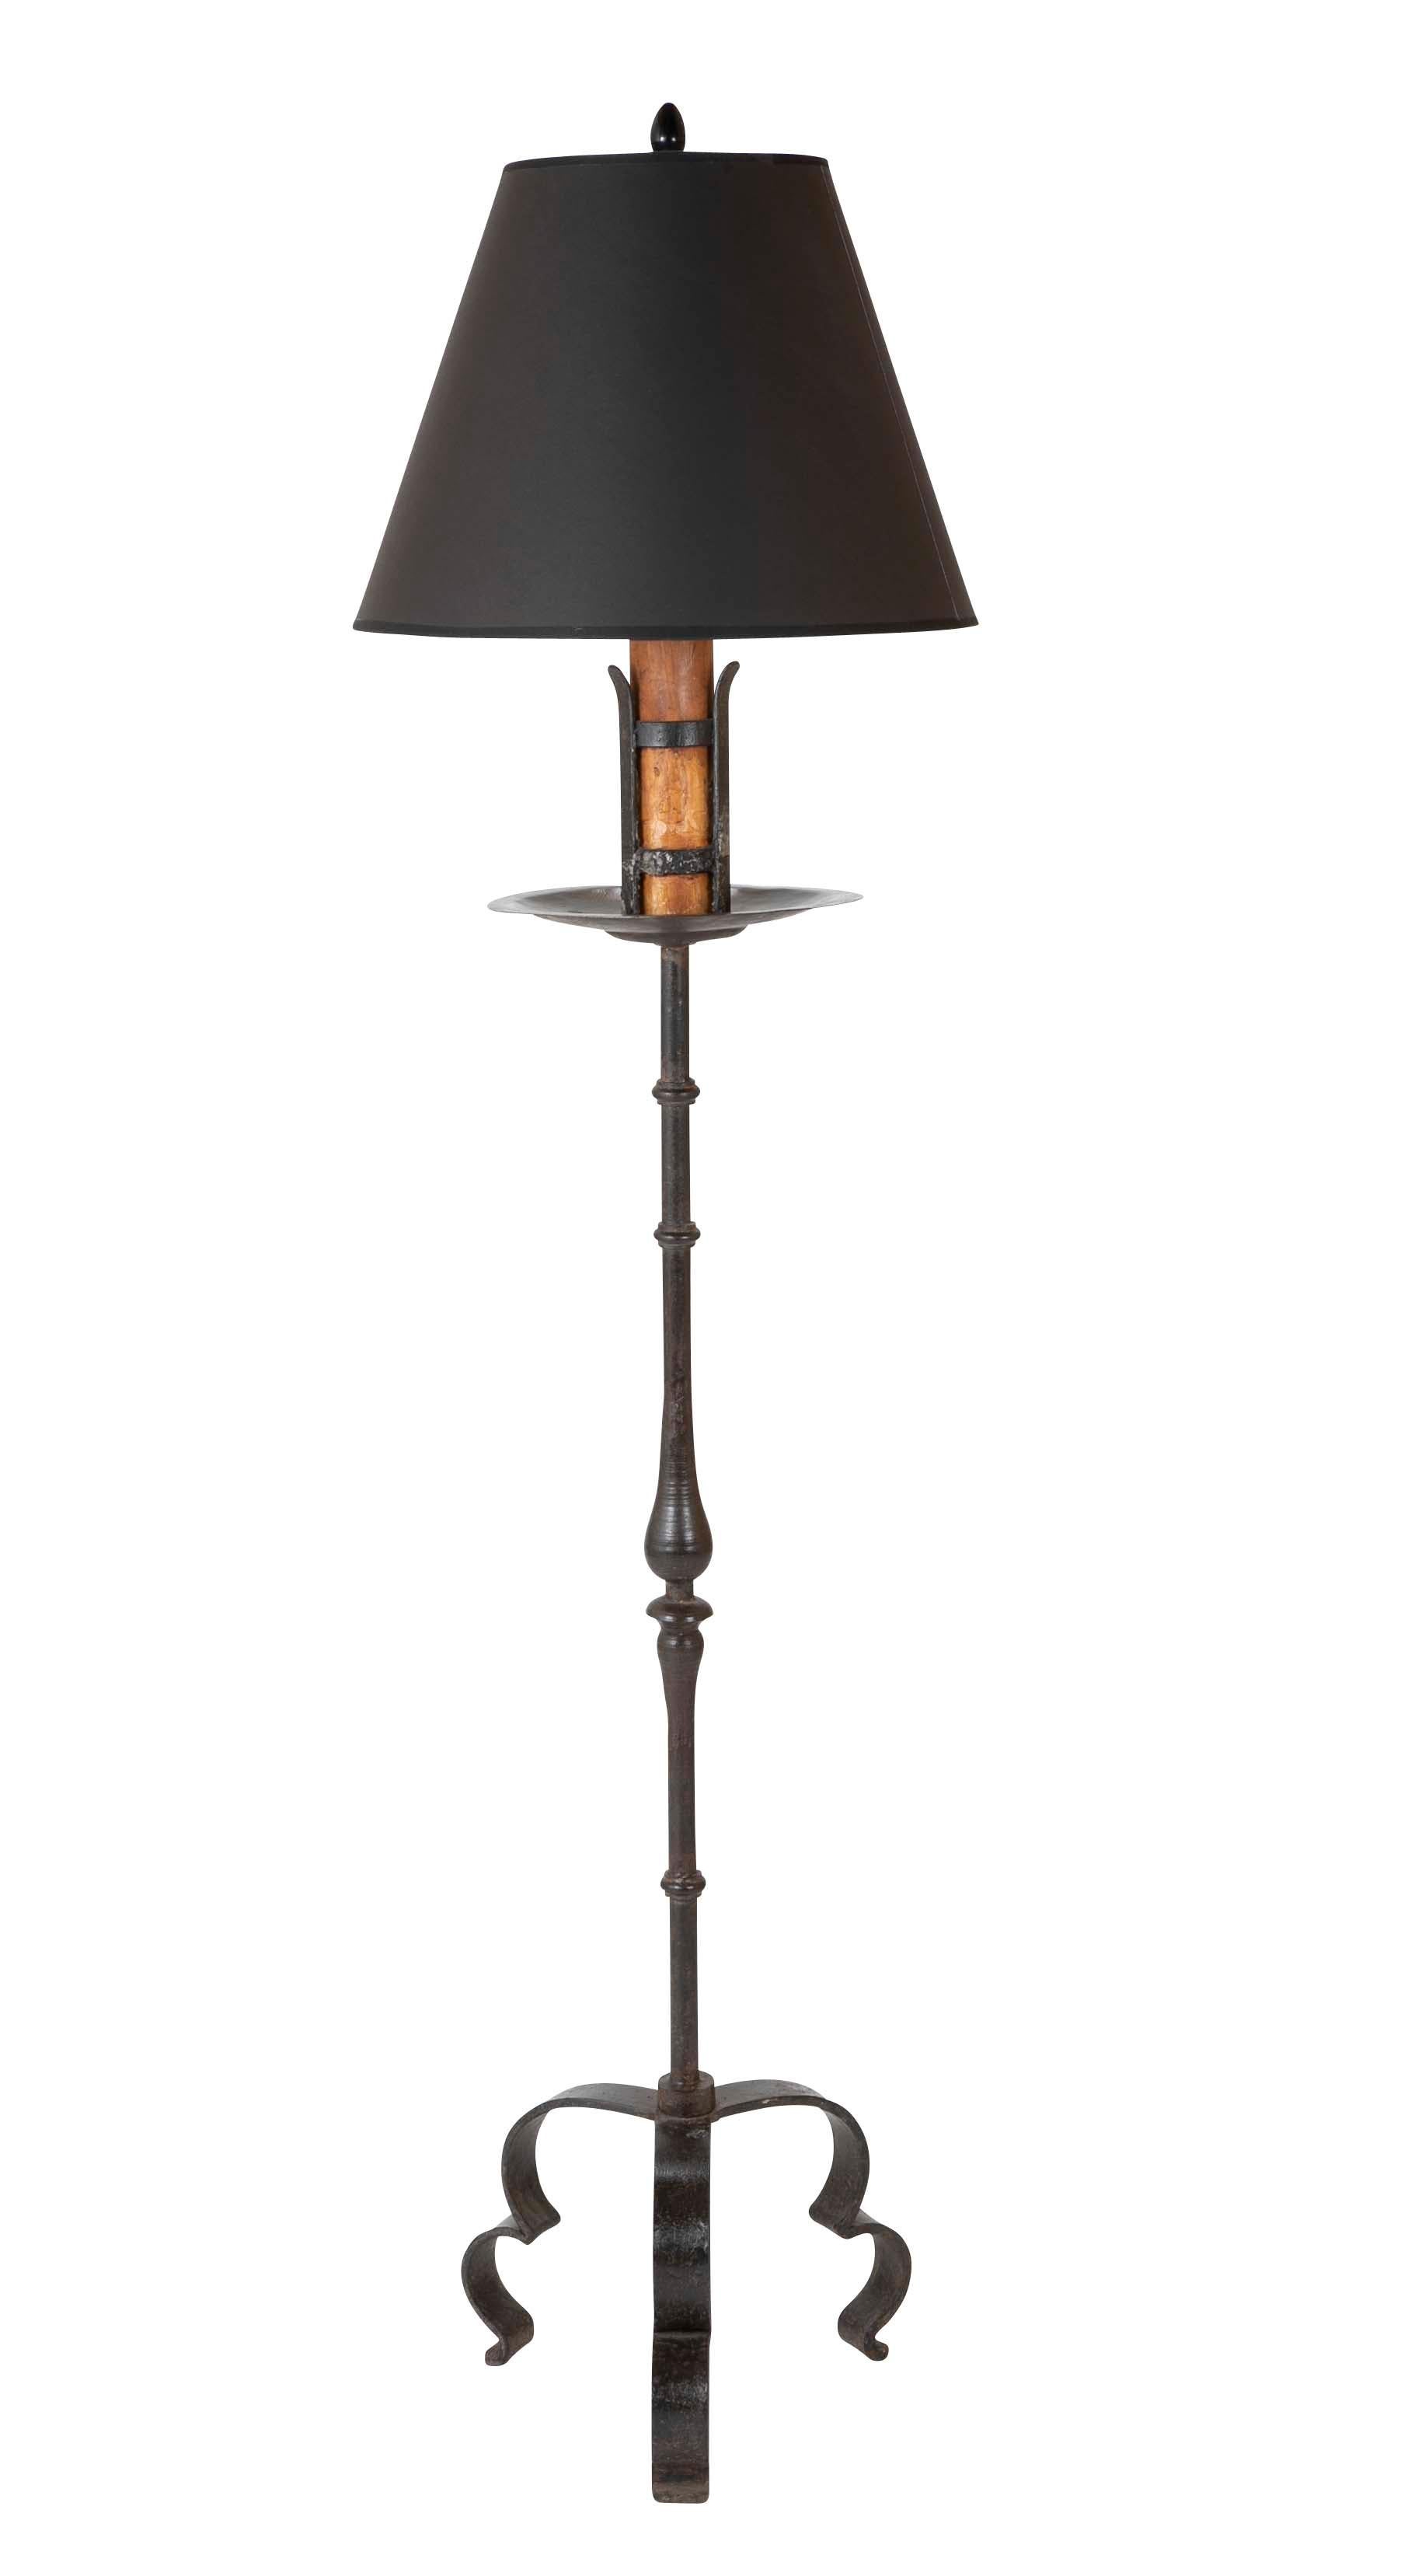 A handsome pair of Spanish Baroque style wrought iron torchère floor lamps with black patina. Beautifully handwrought and turned shaft supported by a tripod bases, the drip pan above holding faux candles.
These date from the late 19th century, a